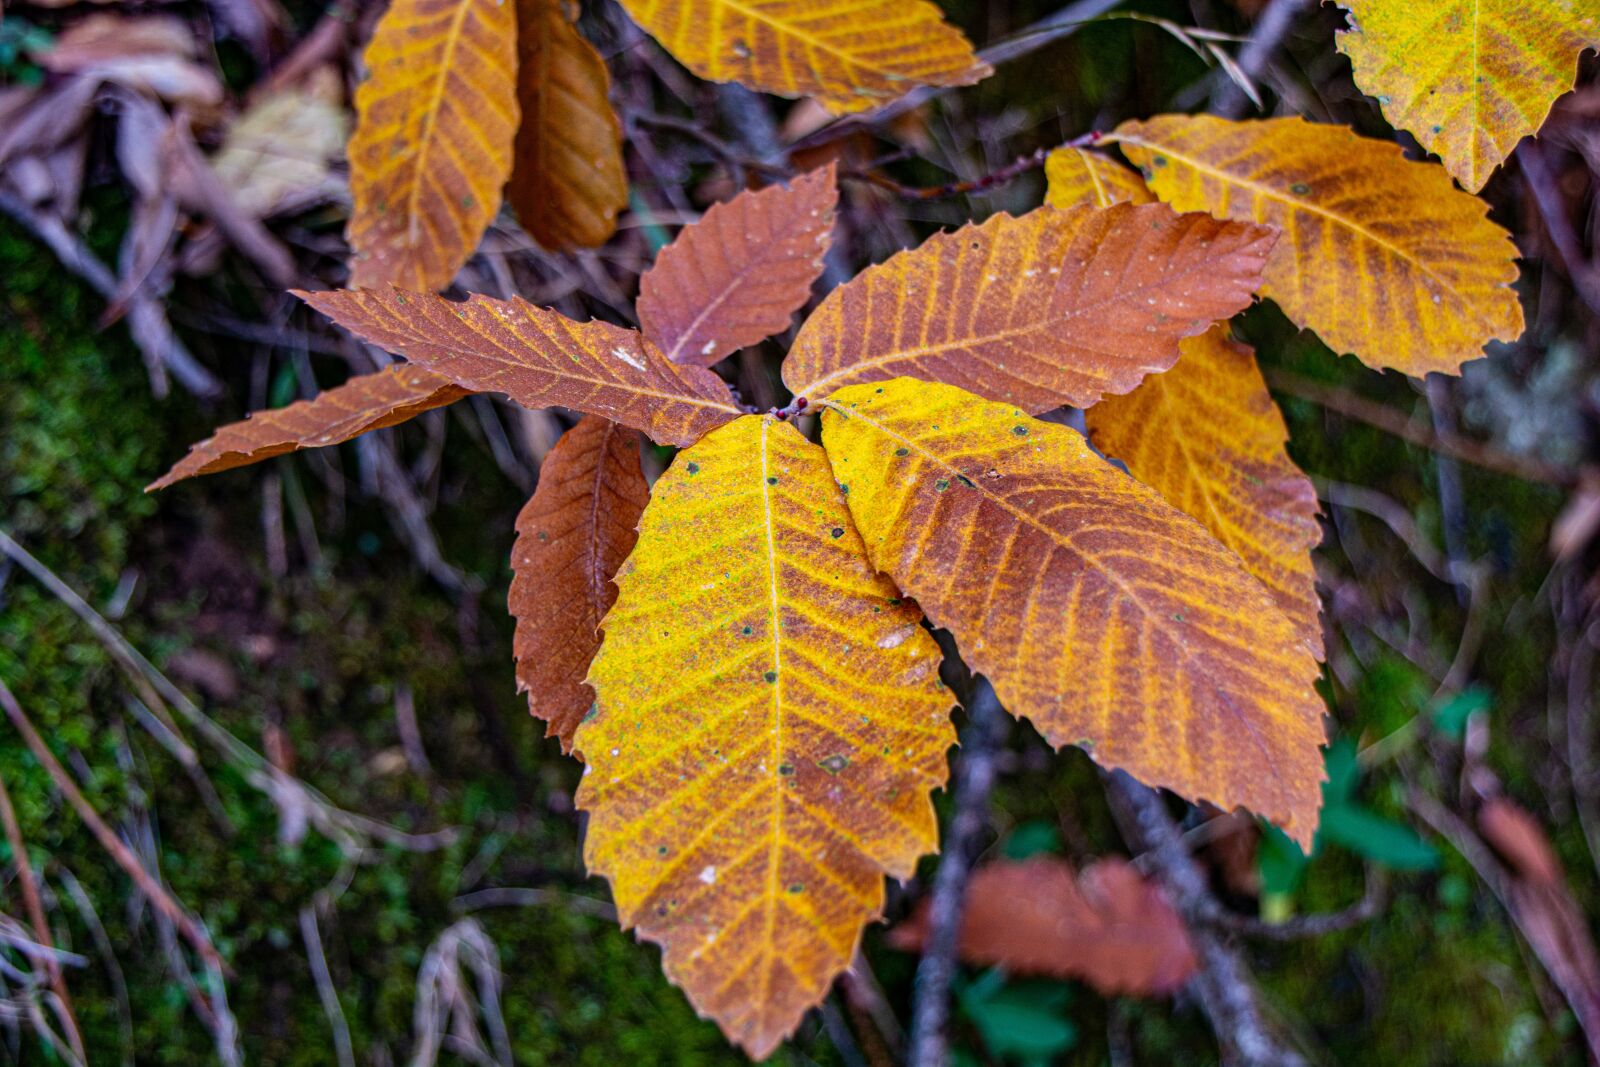 Tamron AF 18-270mm F3.5-6.3 Di II VC LD Aspherical (IF) MACRO sample photo. Leaves, autumn, nature photography